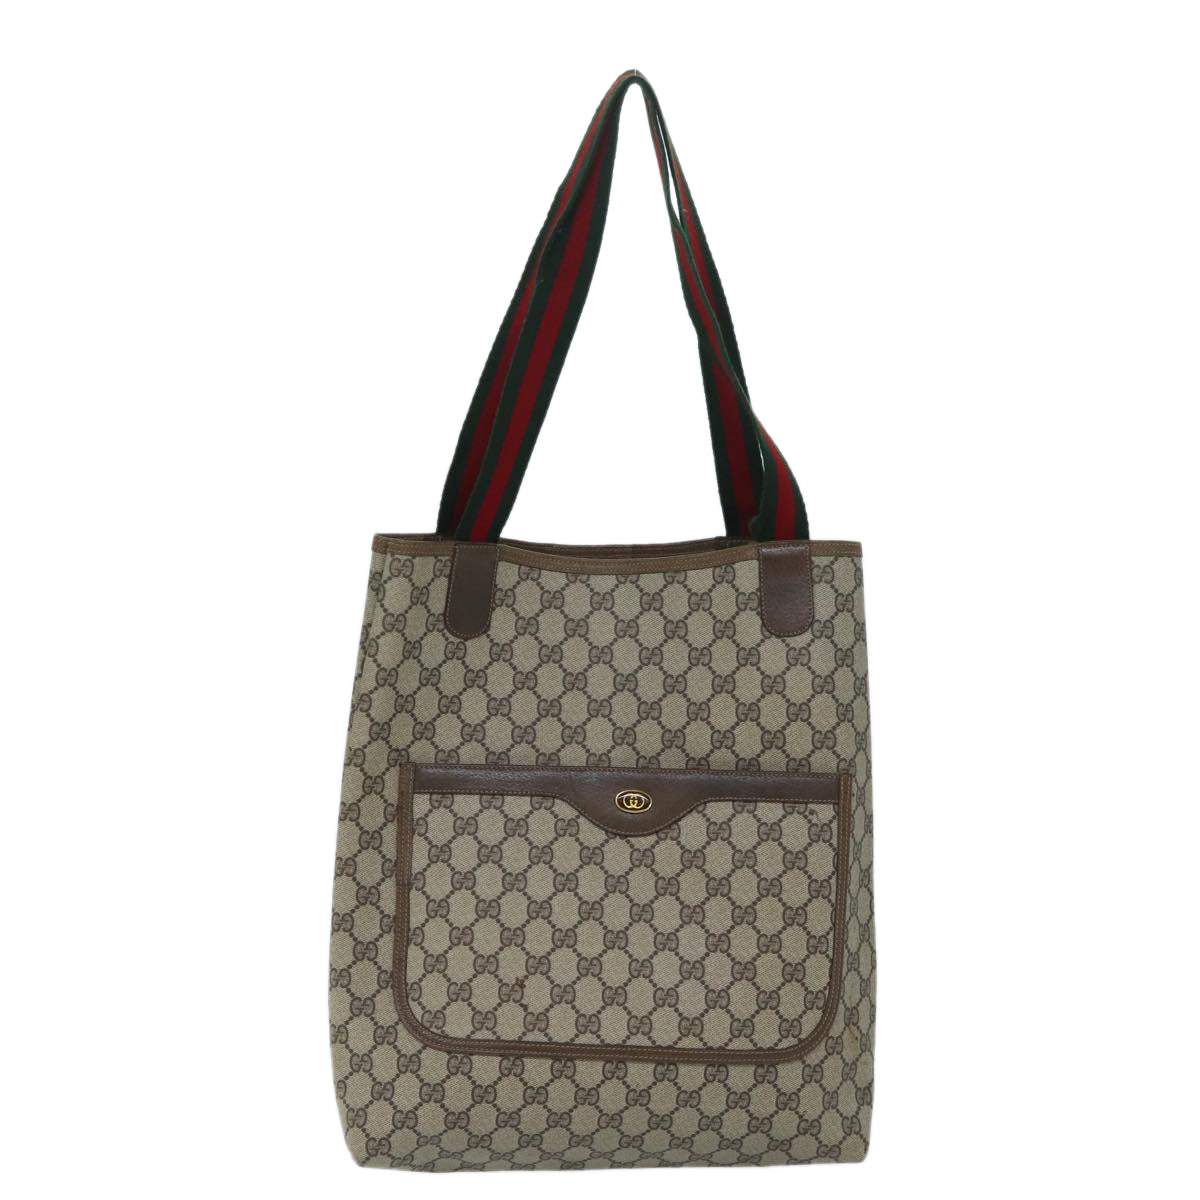 GUCCI GG Supreme Web Sherry Line Tote Bag Beige Red Green 39 02 003 Auth yk11426 - 0